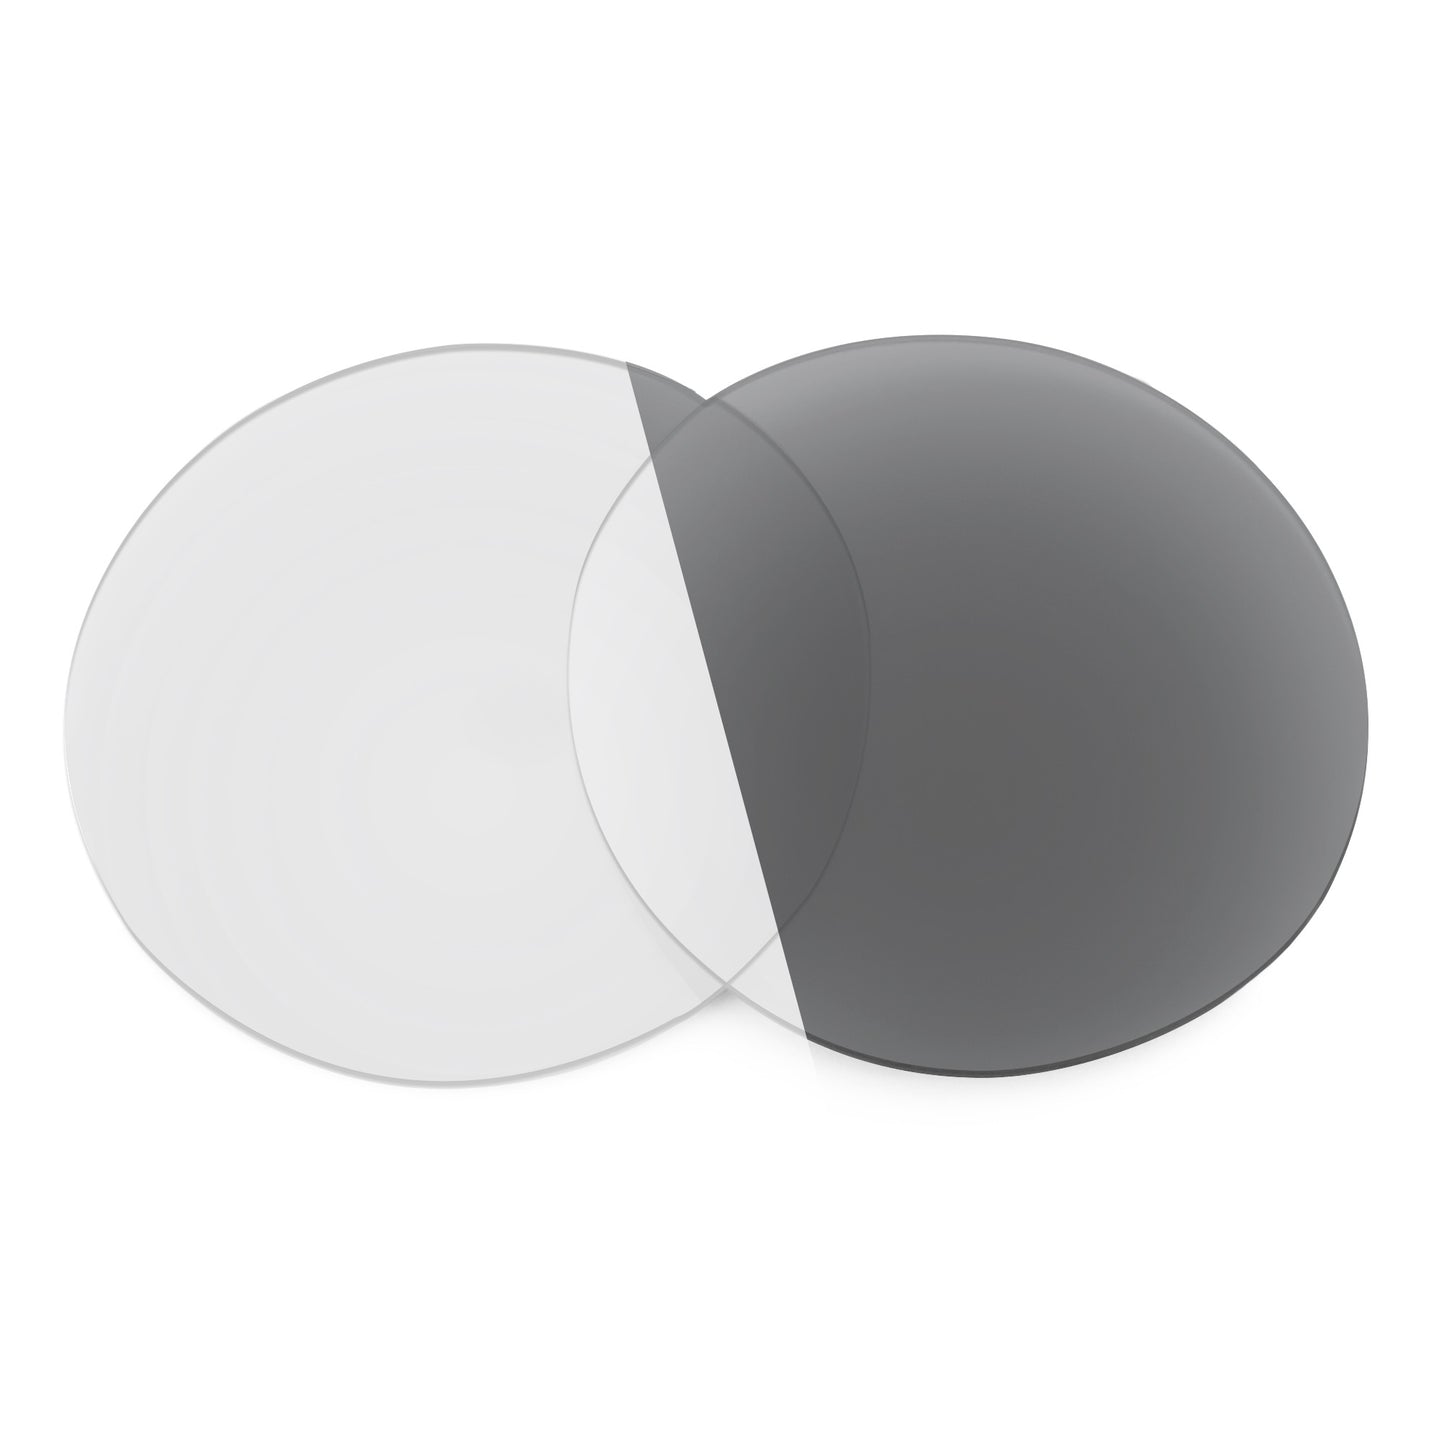 Revant replacement lenses for Ray-Ban RB3447 50mm Non-Polarized Adapt Gray Photochromic